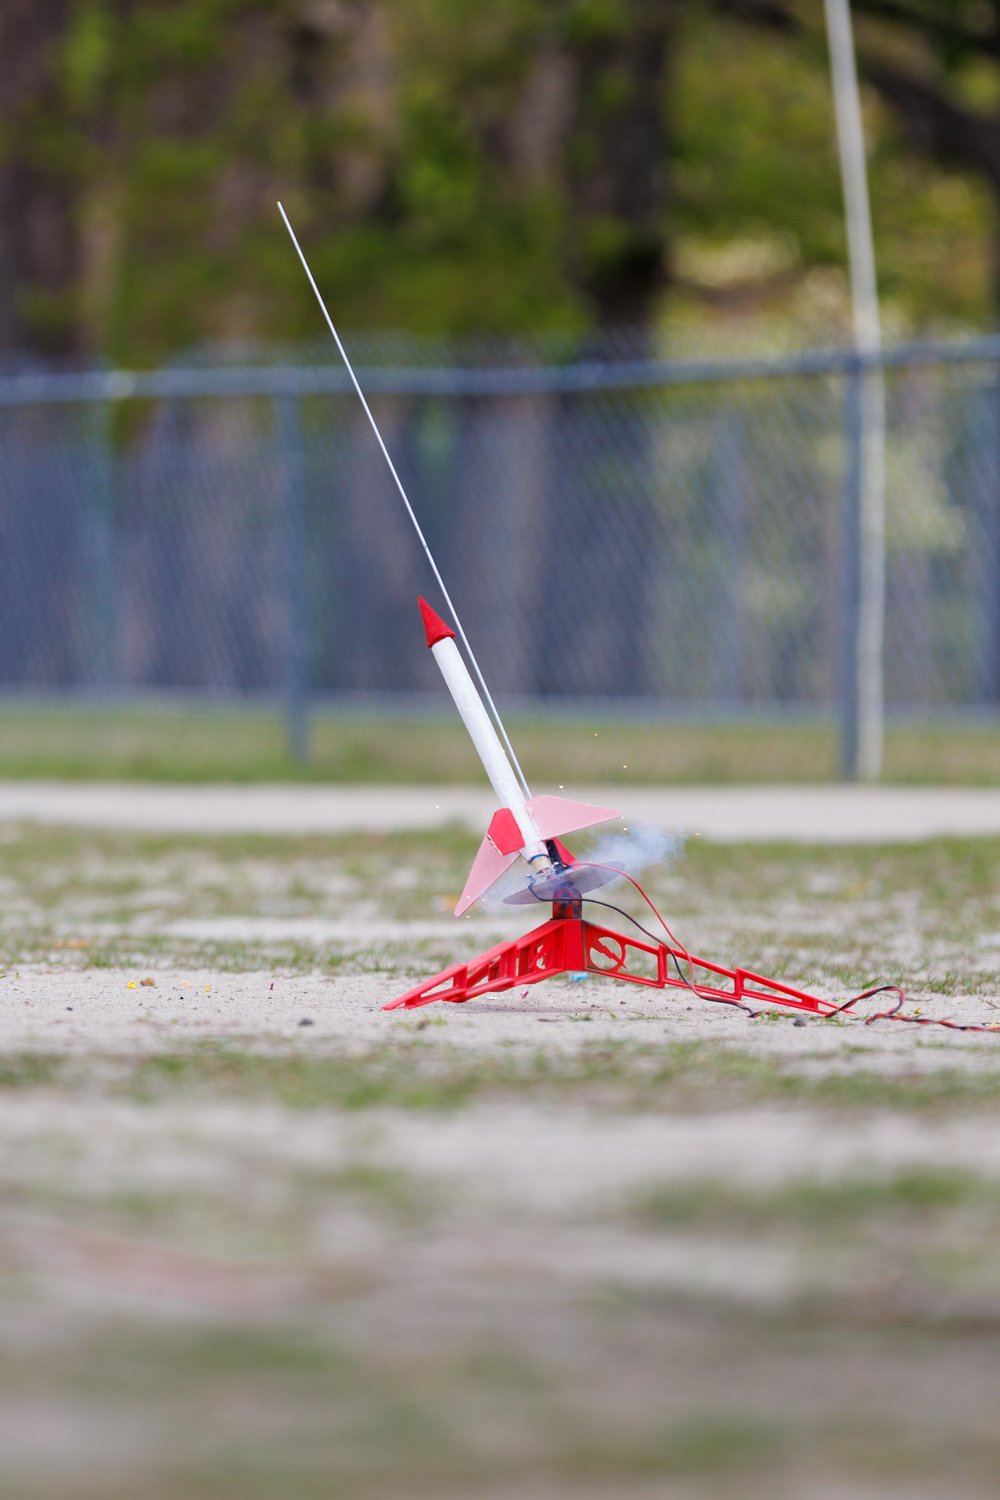 Students at Seventy-First Classical Middle School made rockets and launched them Wednesday in the back lawn of the school in a STEM exercise.